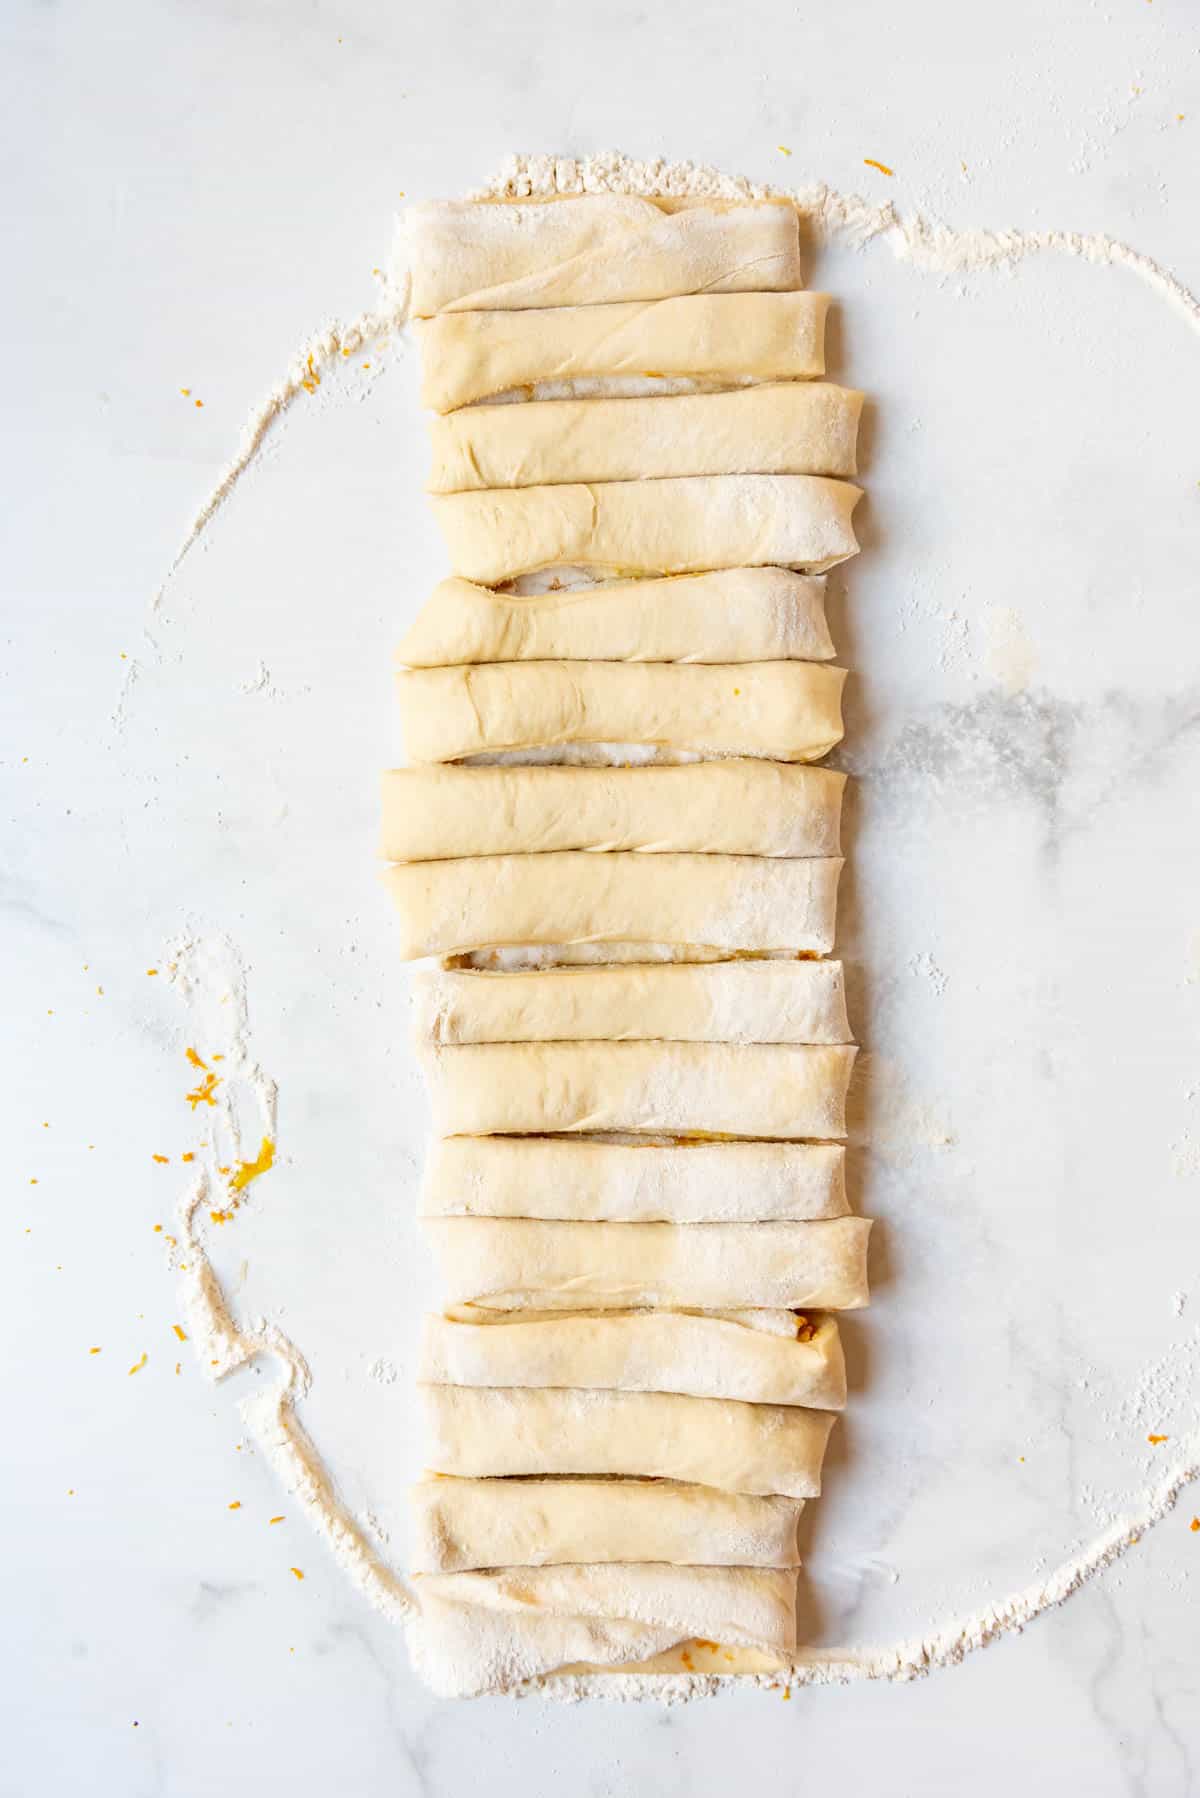 Folded sweet roll dough cut into strips on a white surface.